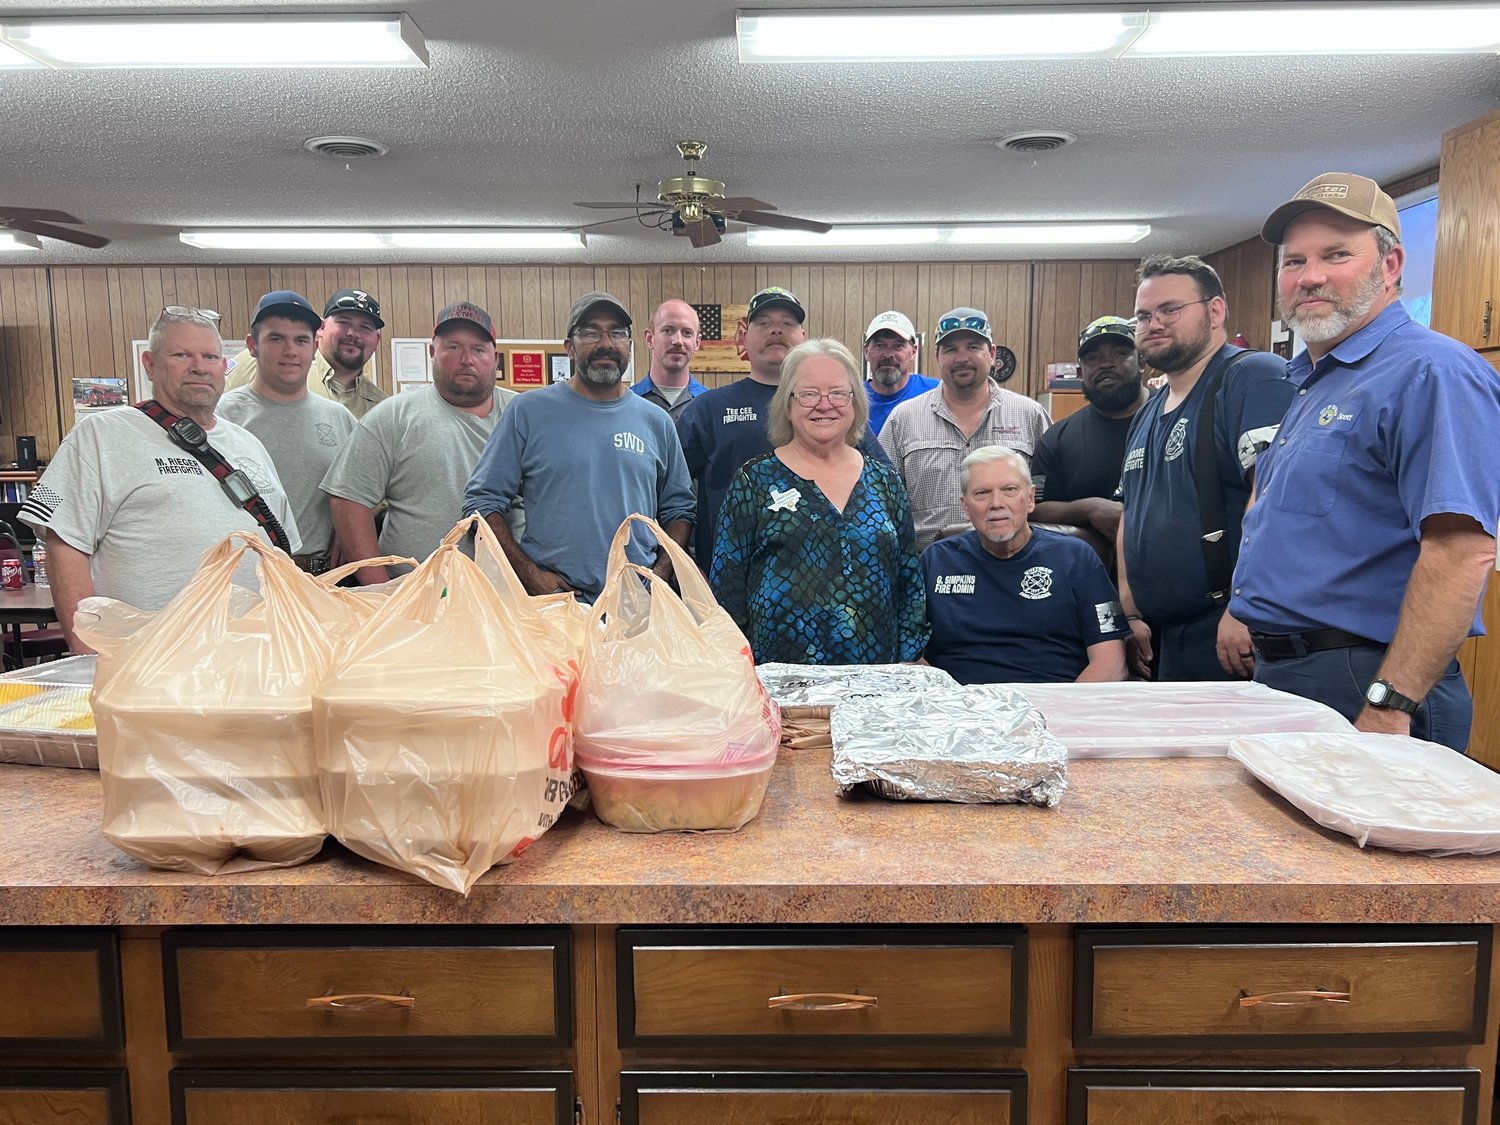 Members of Flora Masonic Lodge 119 and Quitman Chapter 695 Order of the Eastern Star honored first responders in a joint appreciation spaghetti dinner Tuesday, March 14 and delivered to those on duty. Among those taking part were volunteer firefighters, from left, Mitch Rieger, Marcus Pollard, Cotton Otto, Jason Gallander, Santiago Martinez, Eric Englehardt, Tee Cee Brewer, OES Worthy Matron Margaret Turrentine, Junior Stovall, August Walters, Gary Simpkins, Jeremy Everette, Glen Moore and Chief Scott Wheeler.